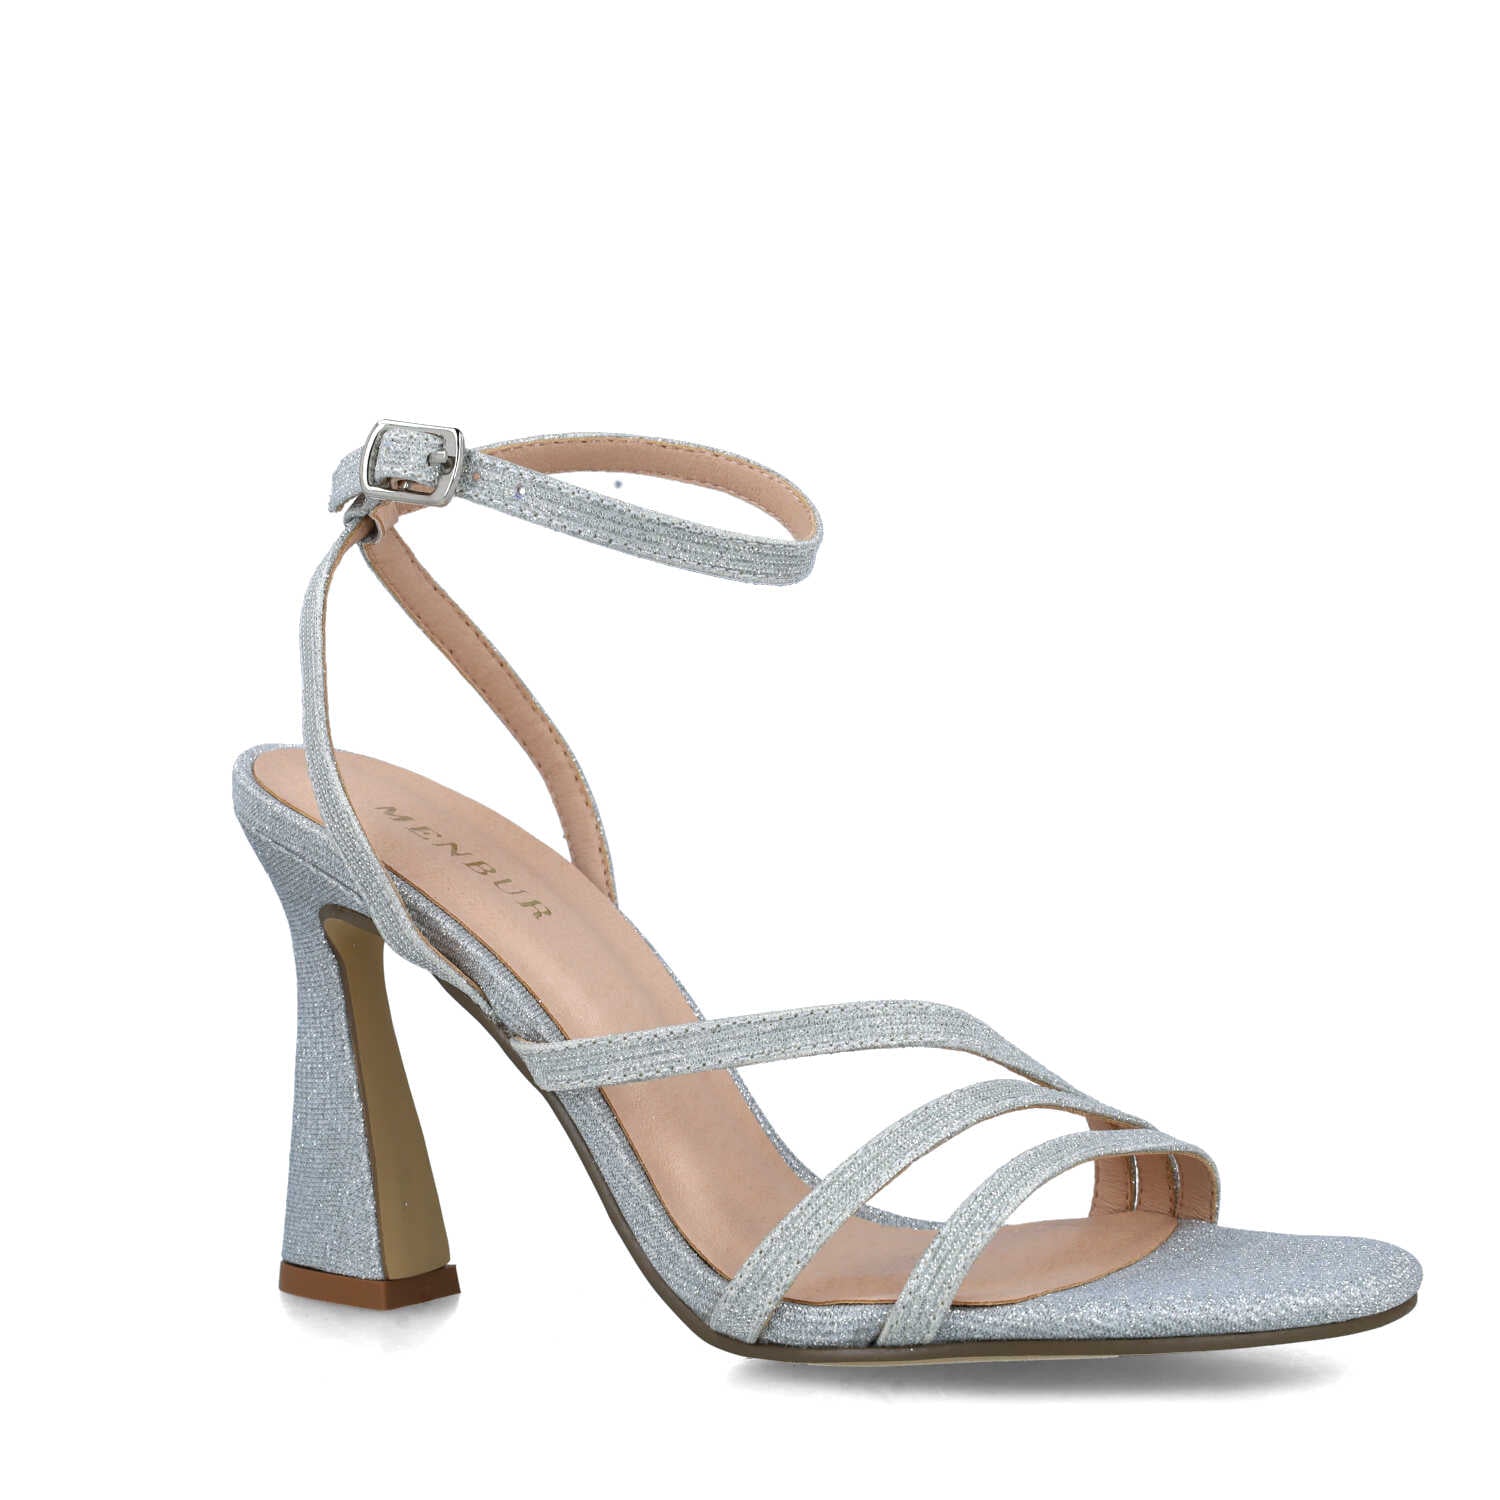 Silver High-Heel Sandals With Ankle-Strap